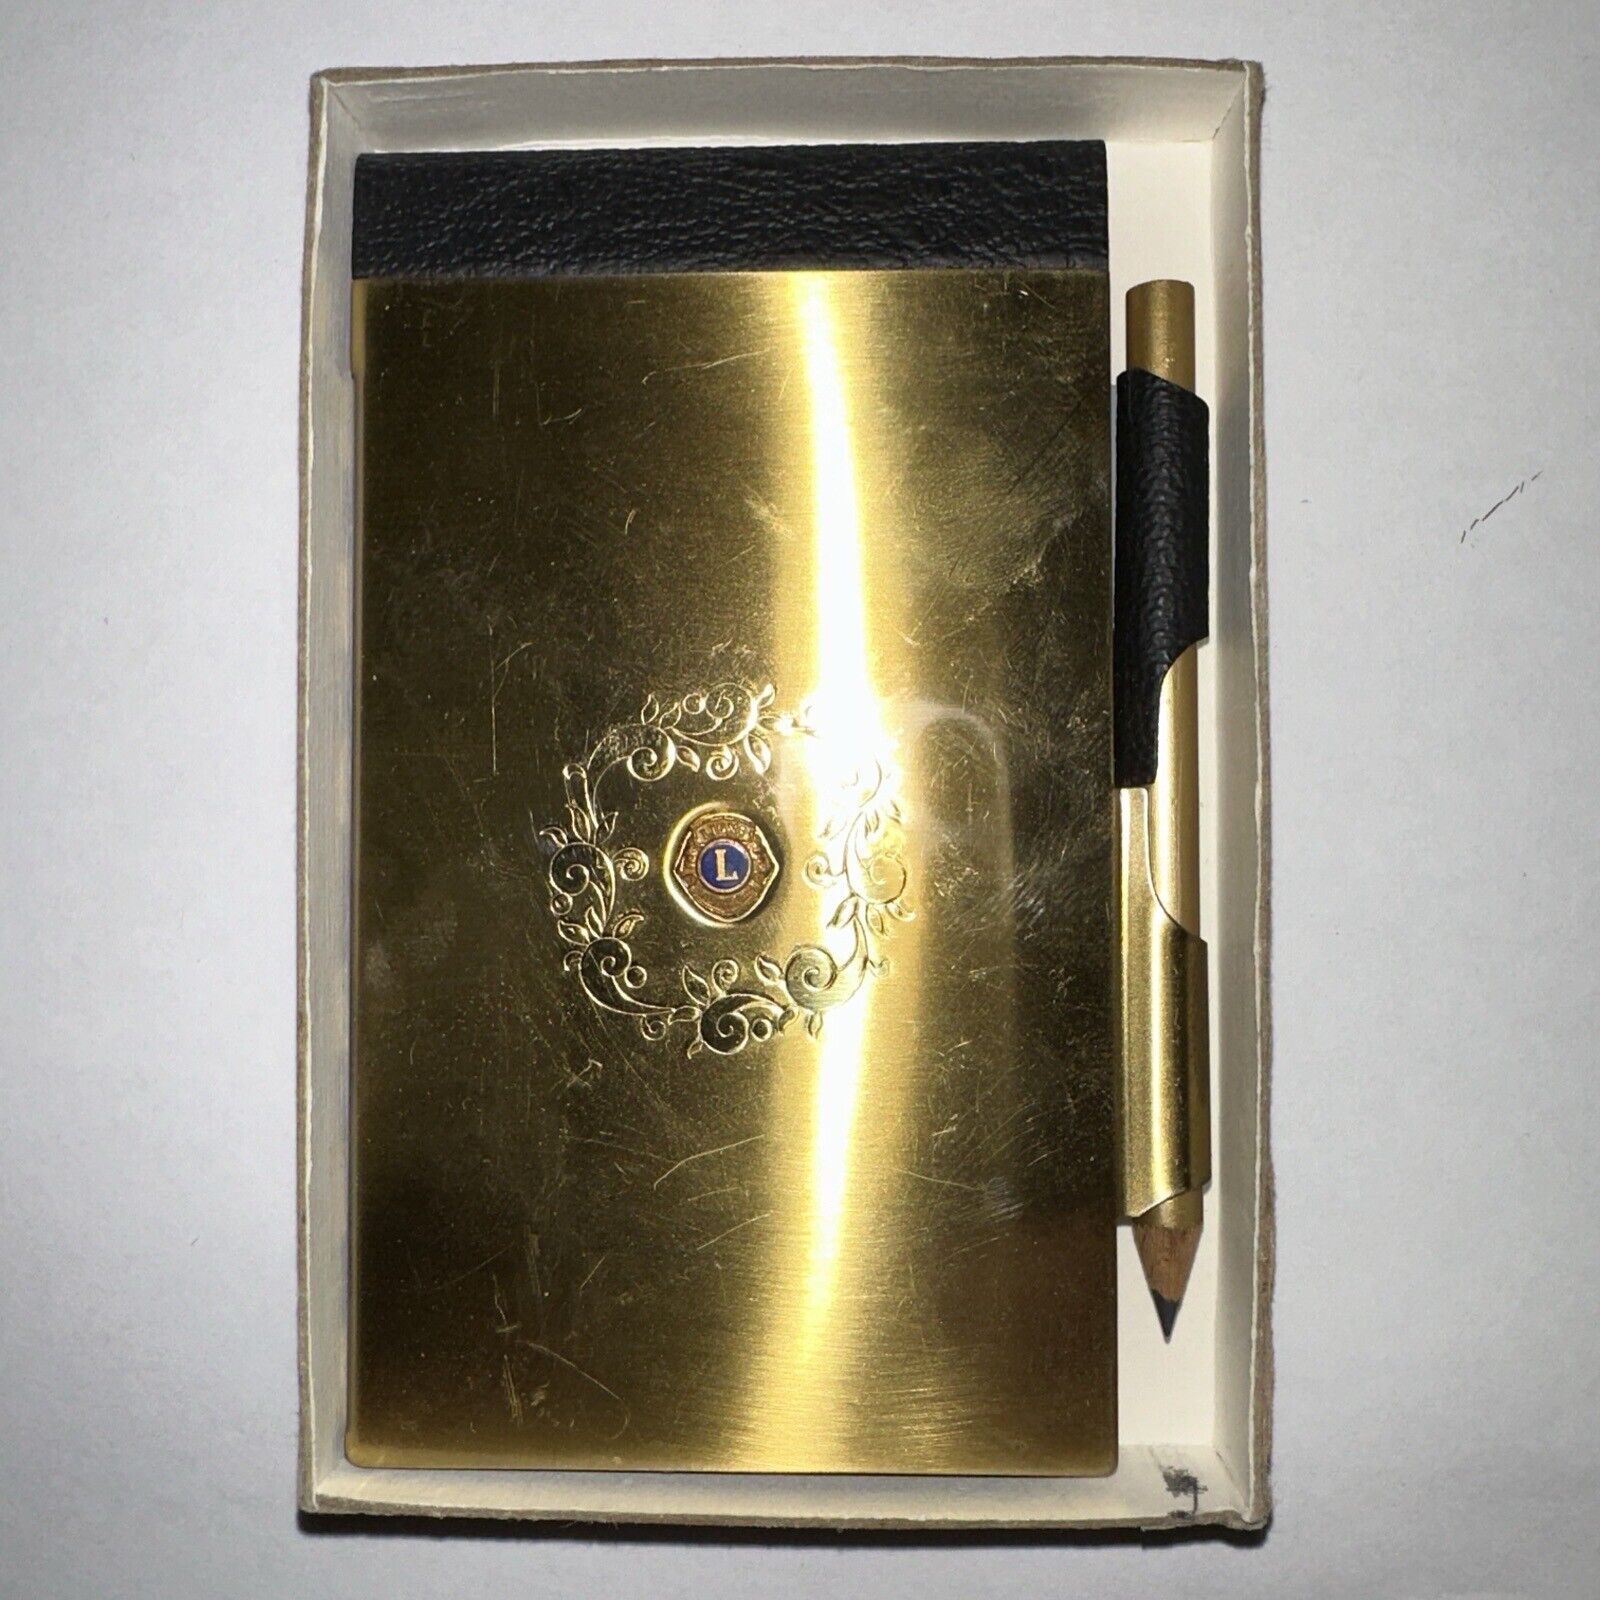 Lions Club Brass Memo Pad With Pencil In Box